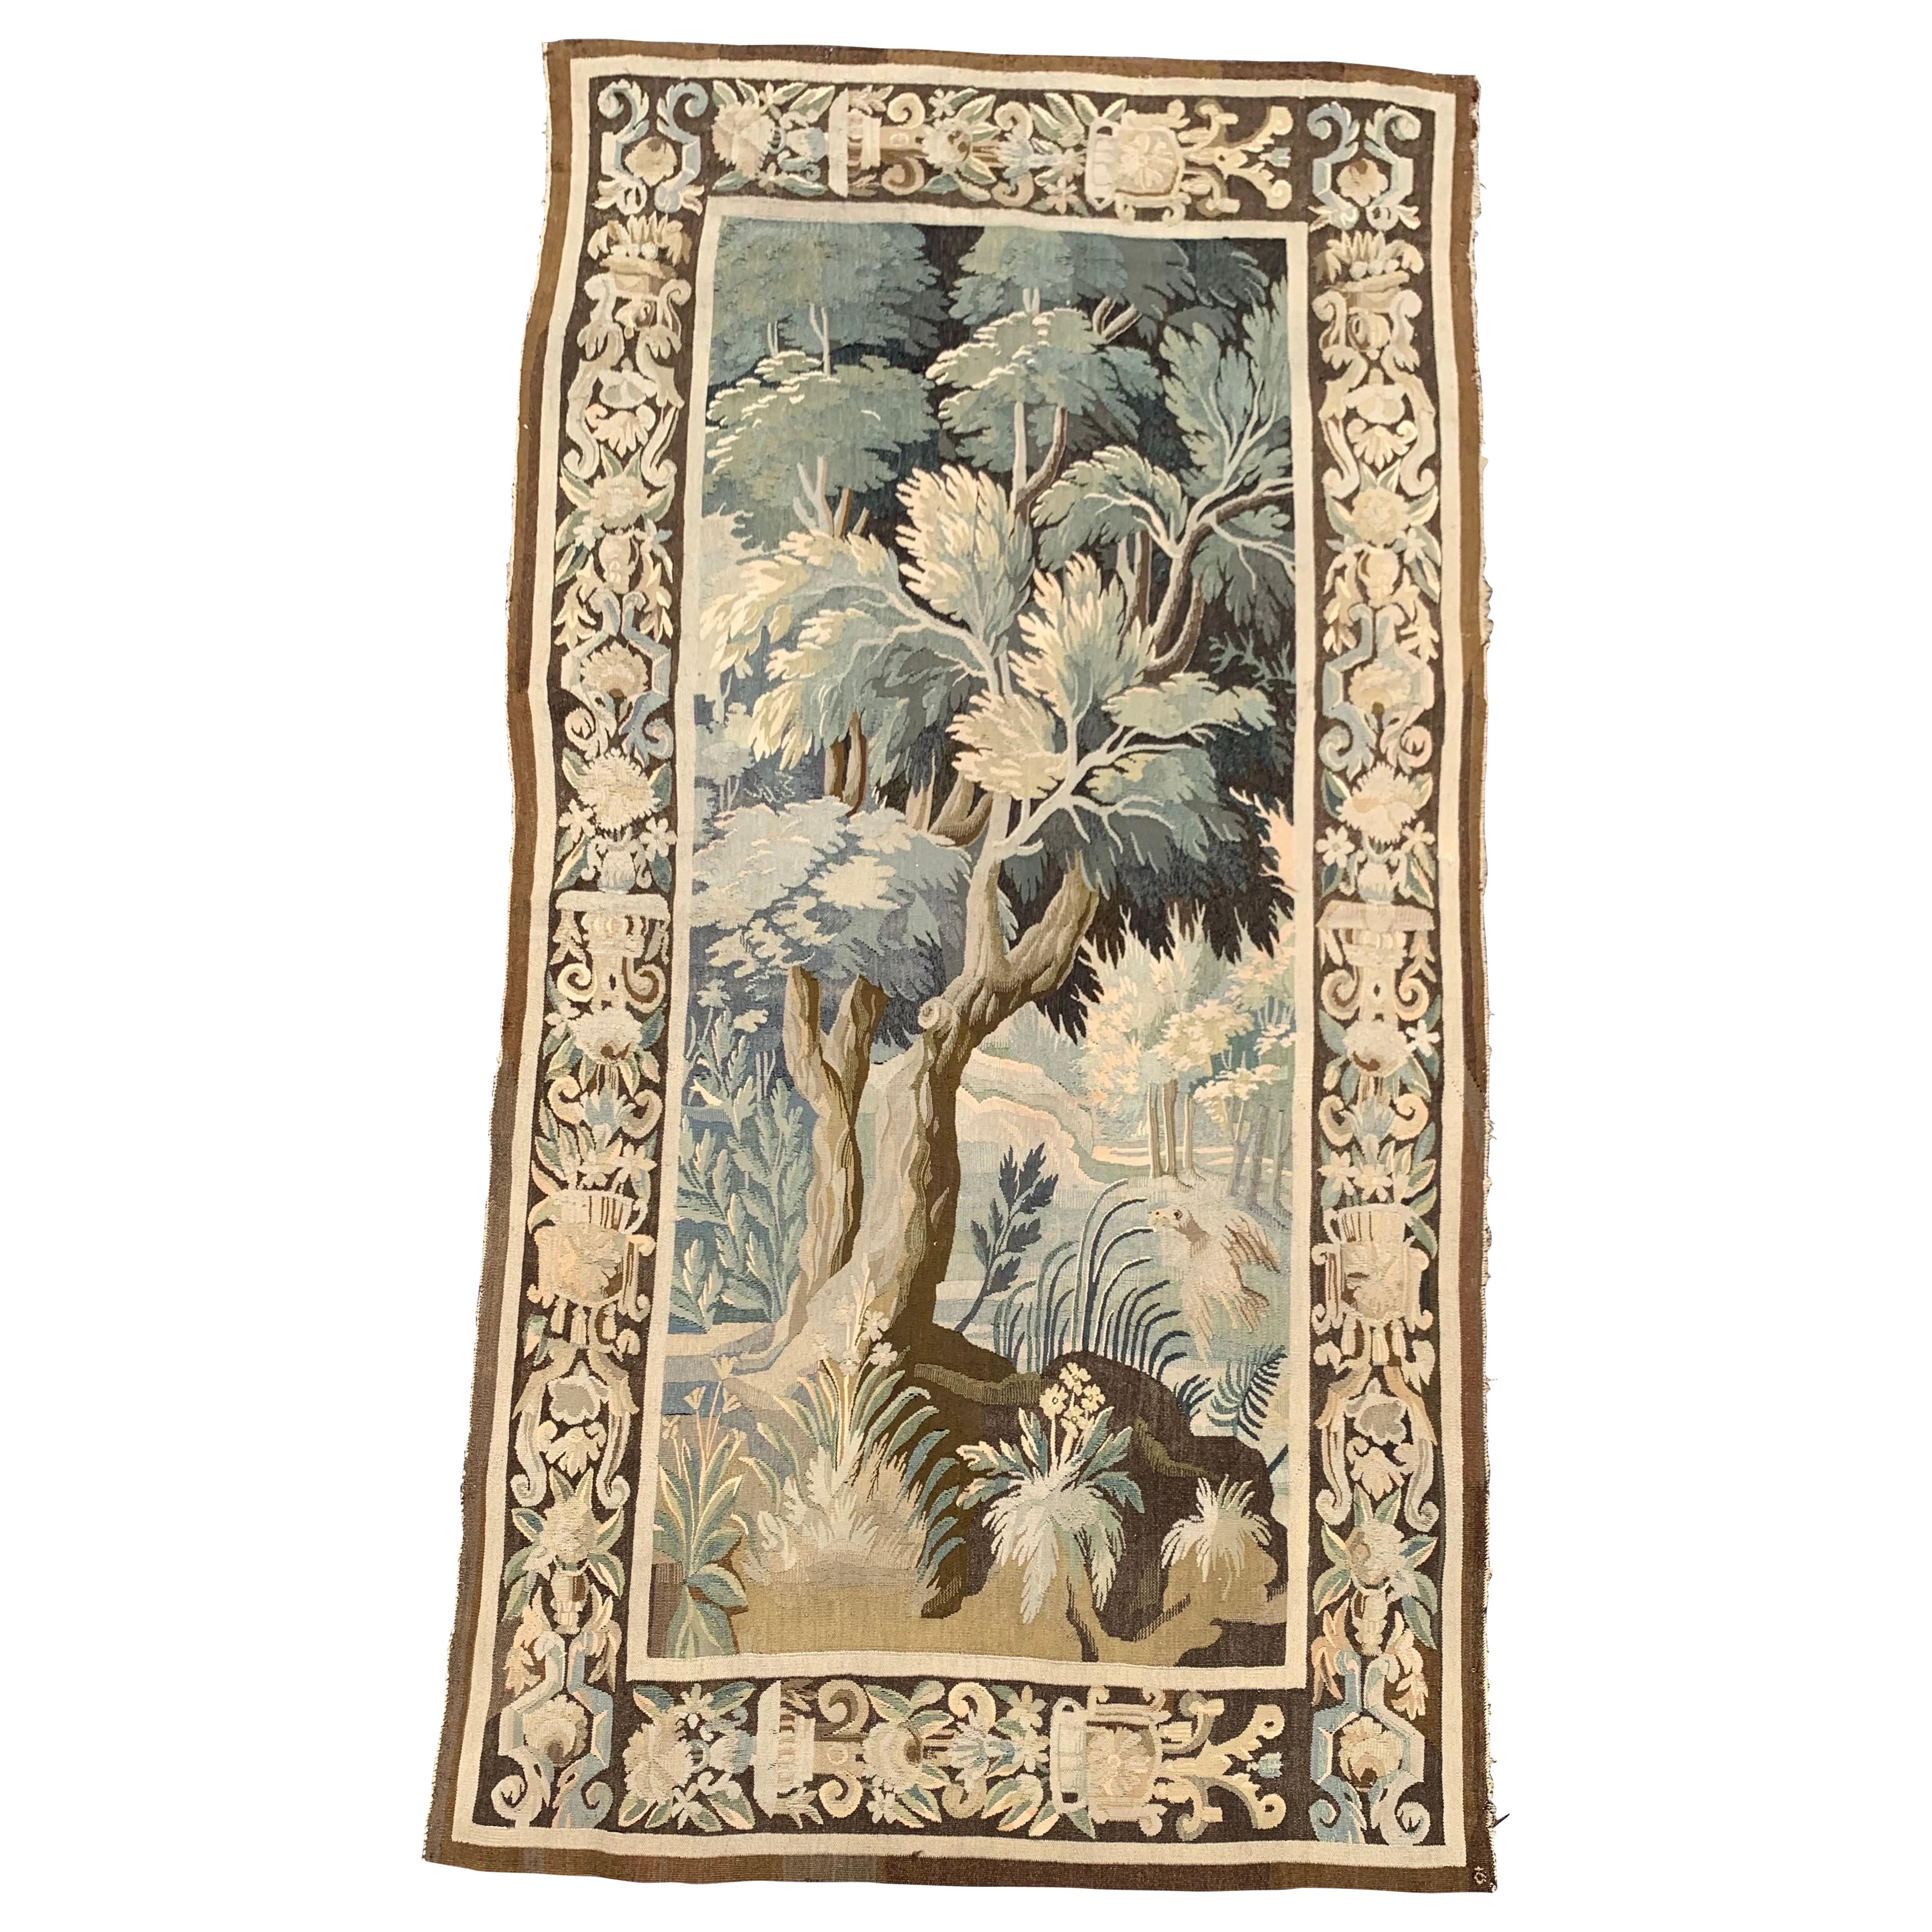 48” x 67” European Woven Tapestry Wall Hanging in Beige or Black “The Birds” 